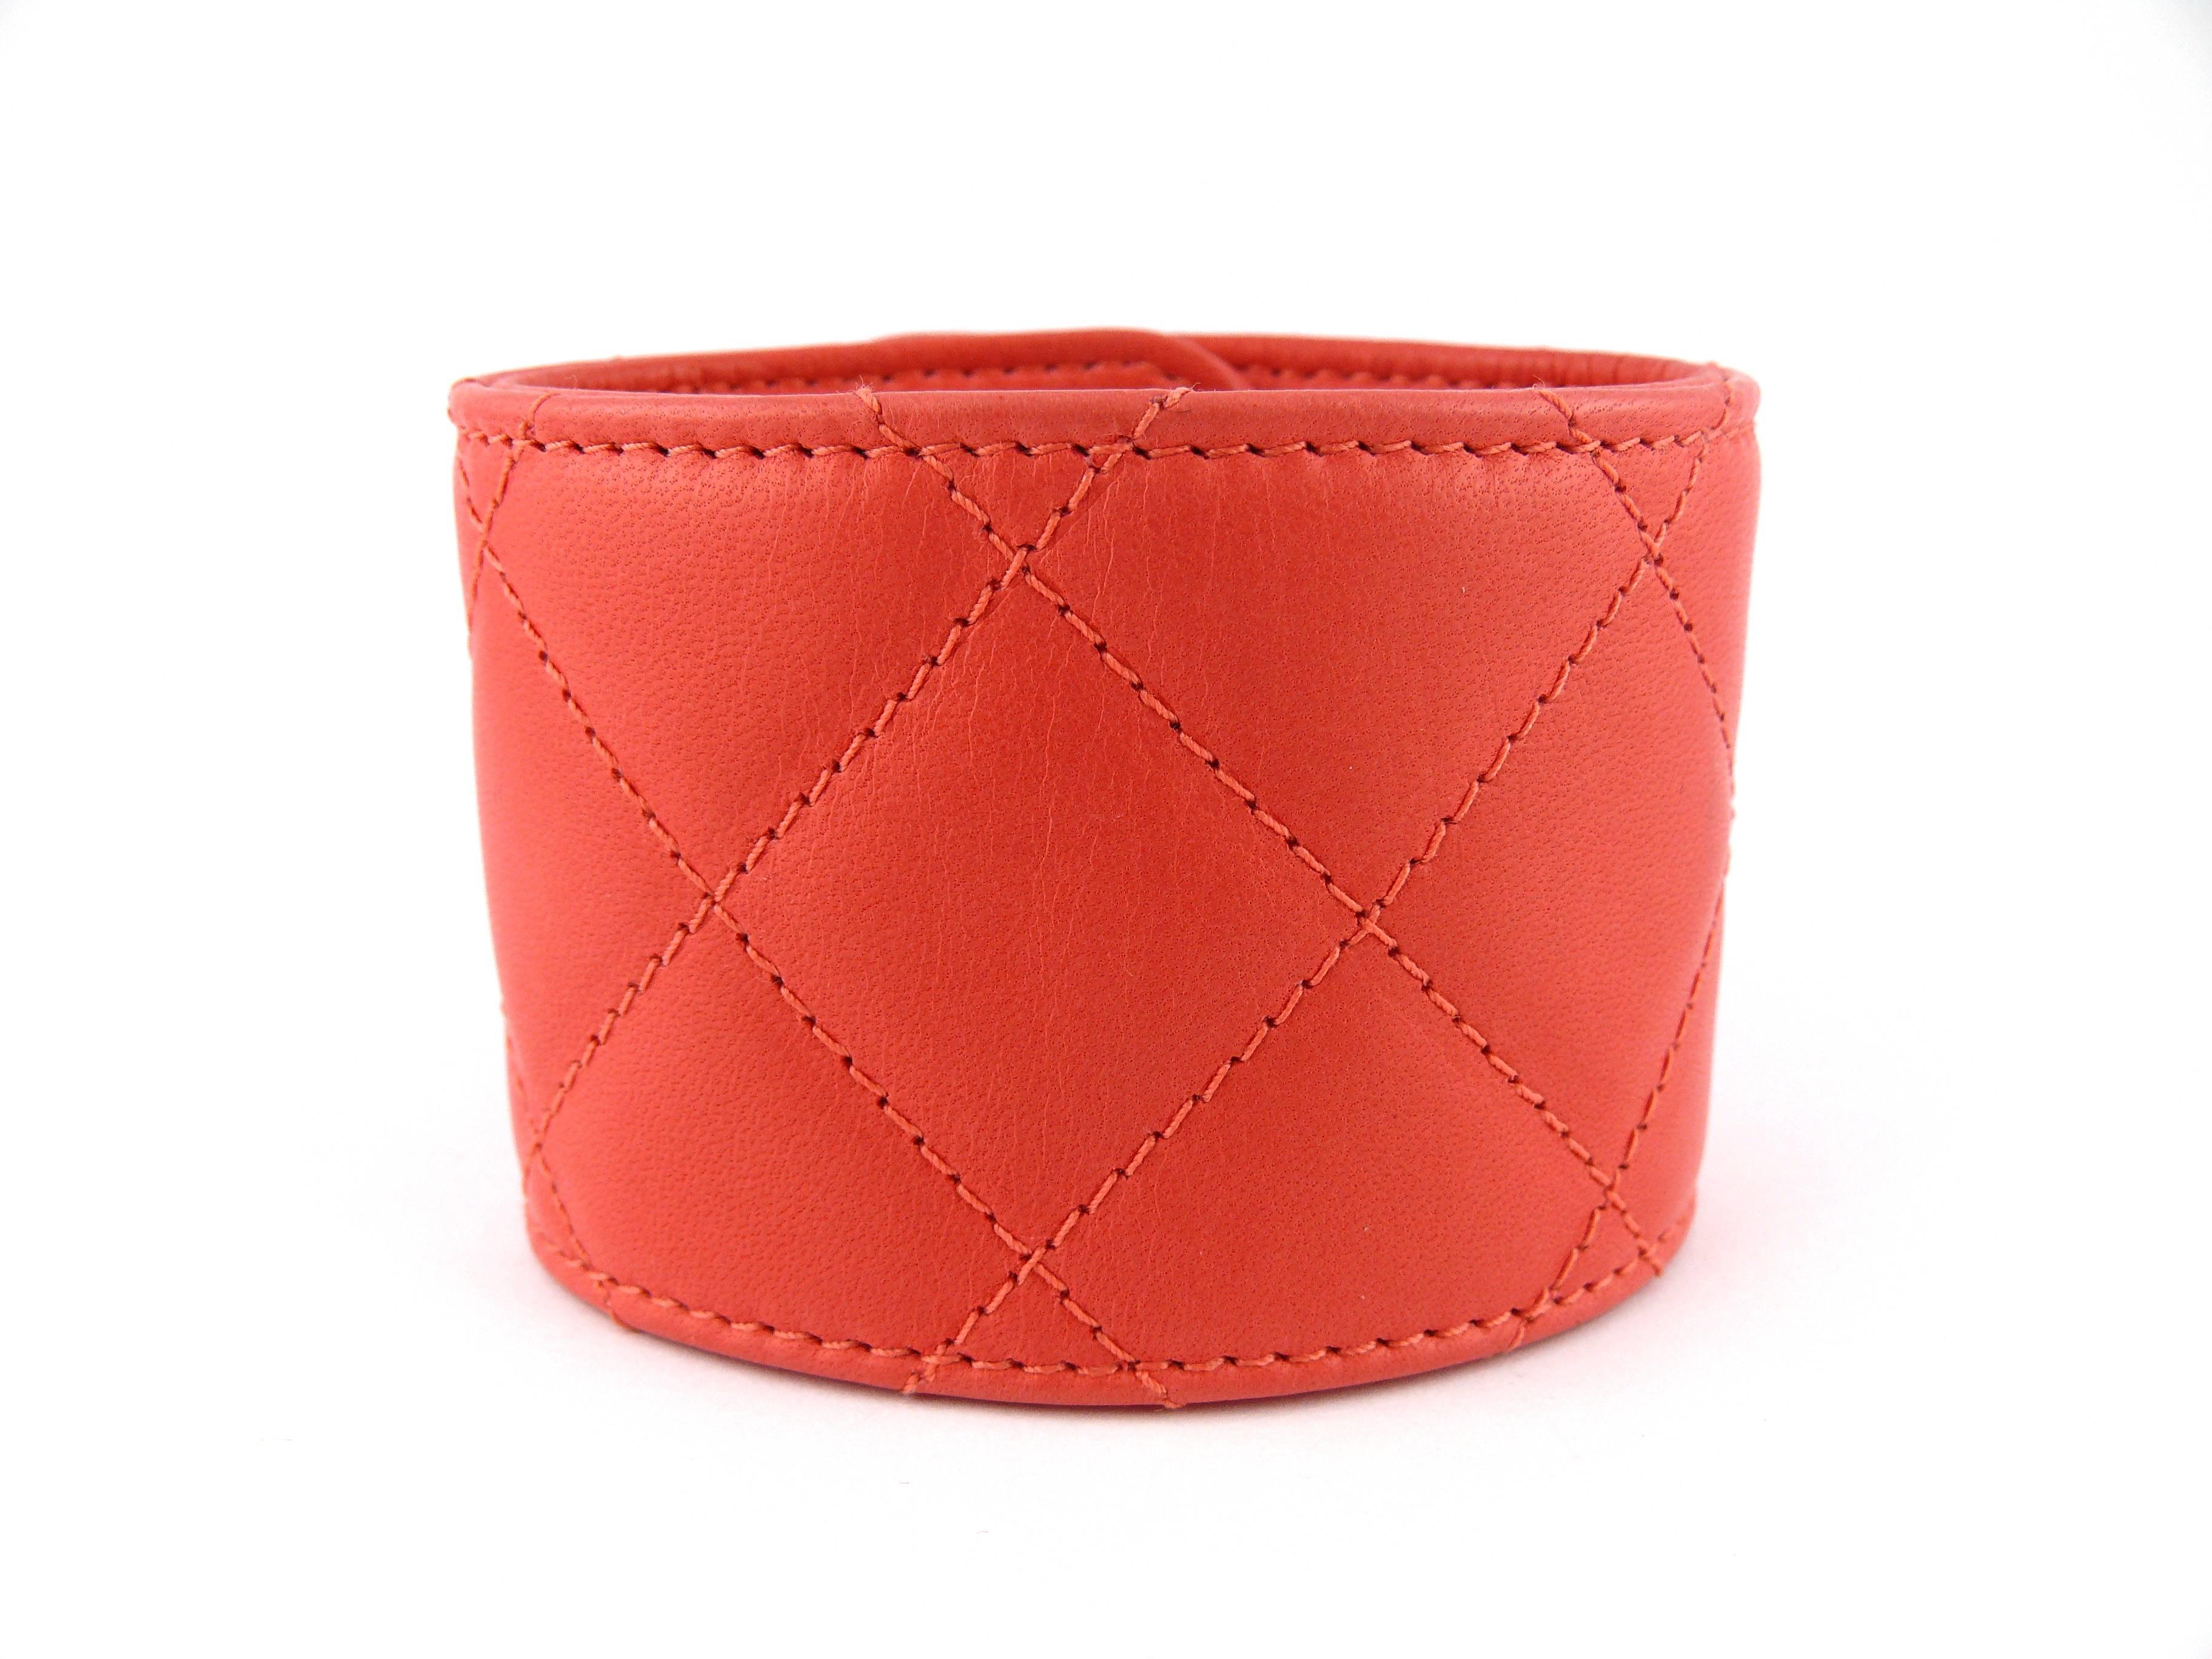 CHANEL lambskin leather cuff bracelet featuring a gun metal CC turn lock.

Stunning coral color, perfect for Spring/Summer !

Embossed on the leather CHANEL B 12 C Made in Italy.
Engraved with the "S" mark for private sale - see photo #3 -